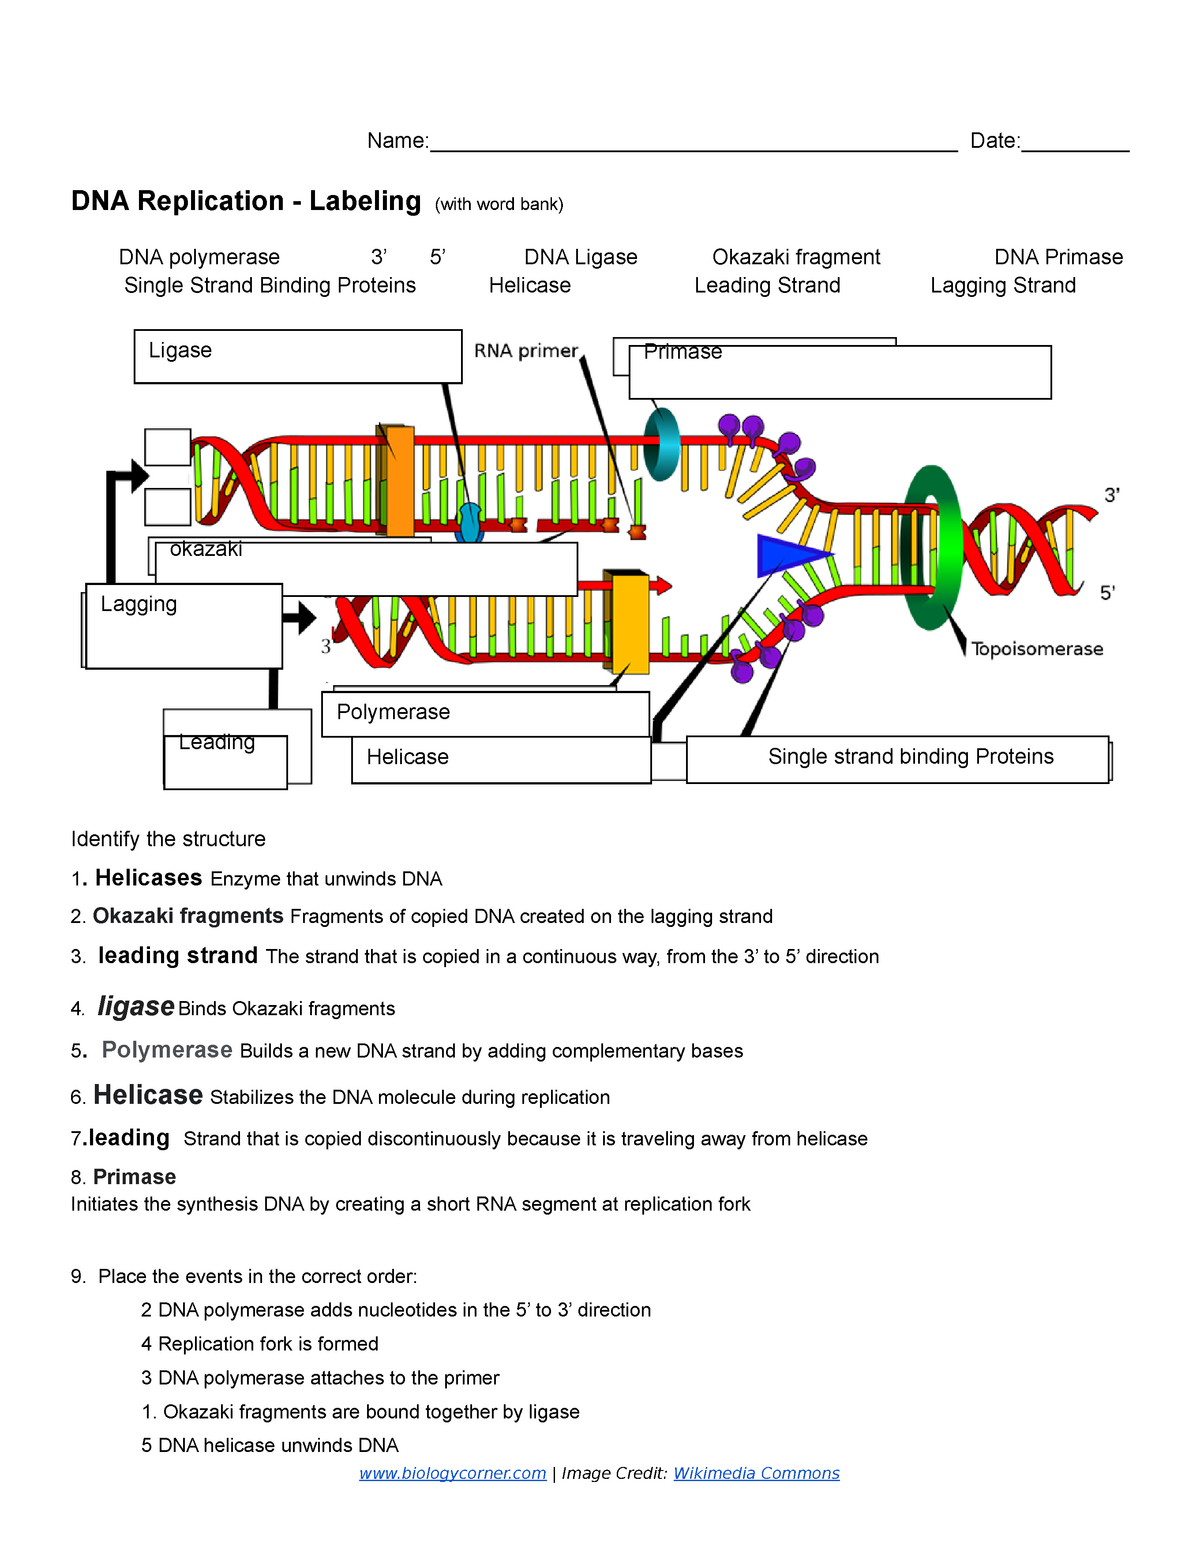 Copy of DNA Replication - Labeling 22 - Name: - StuDocu For Dna Replication Review Worksheet